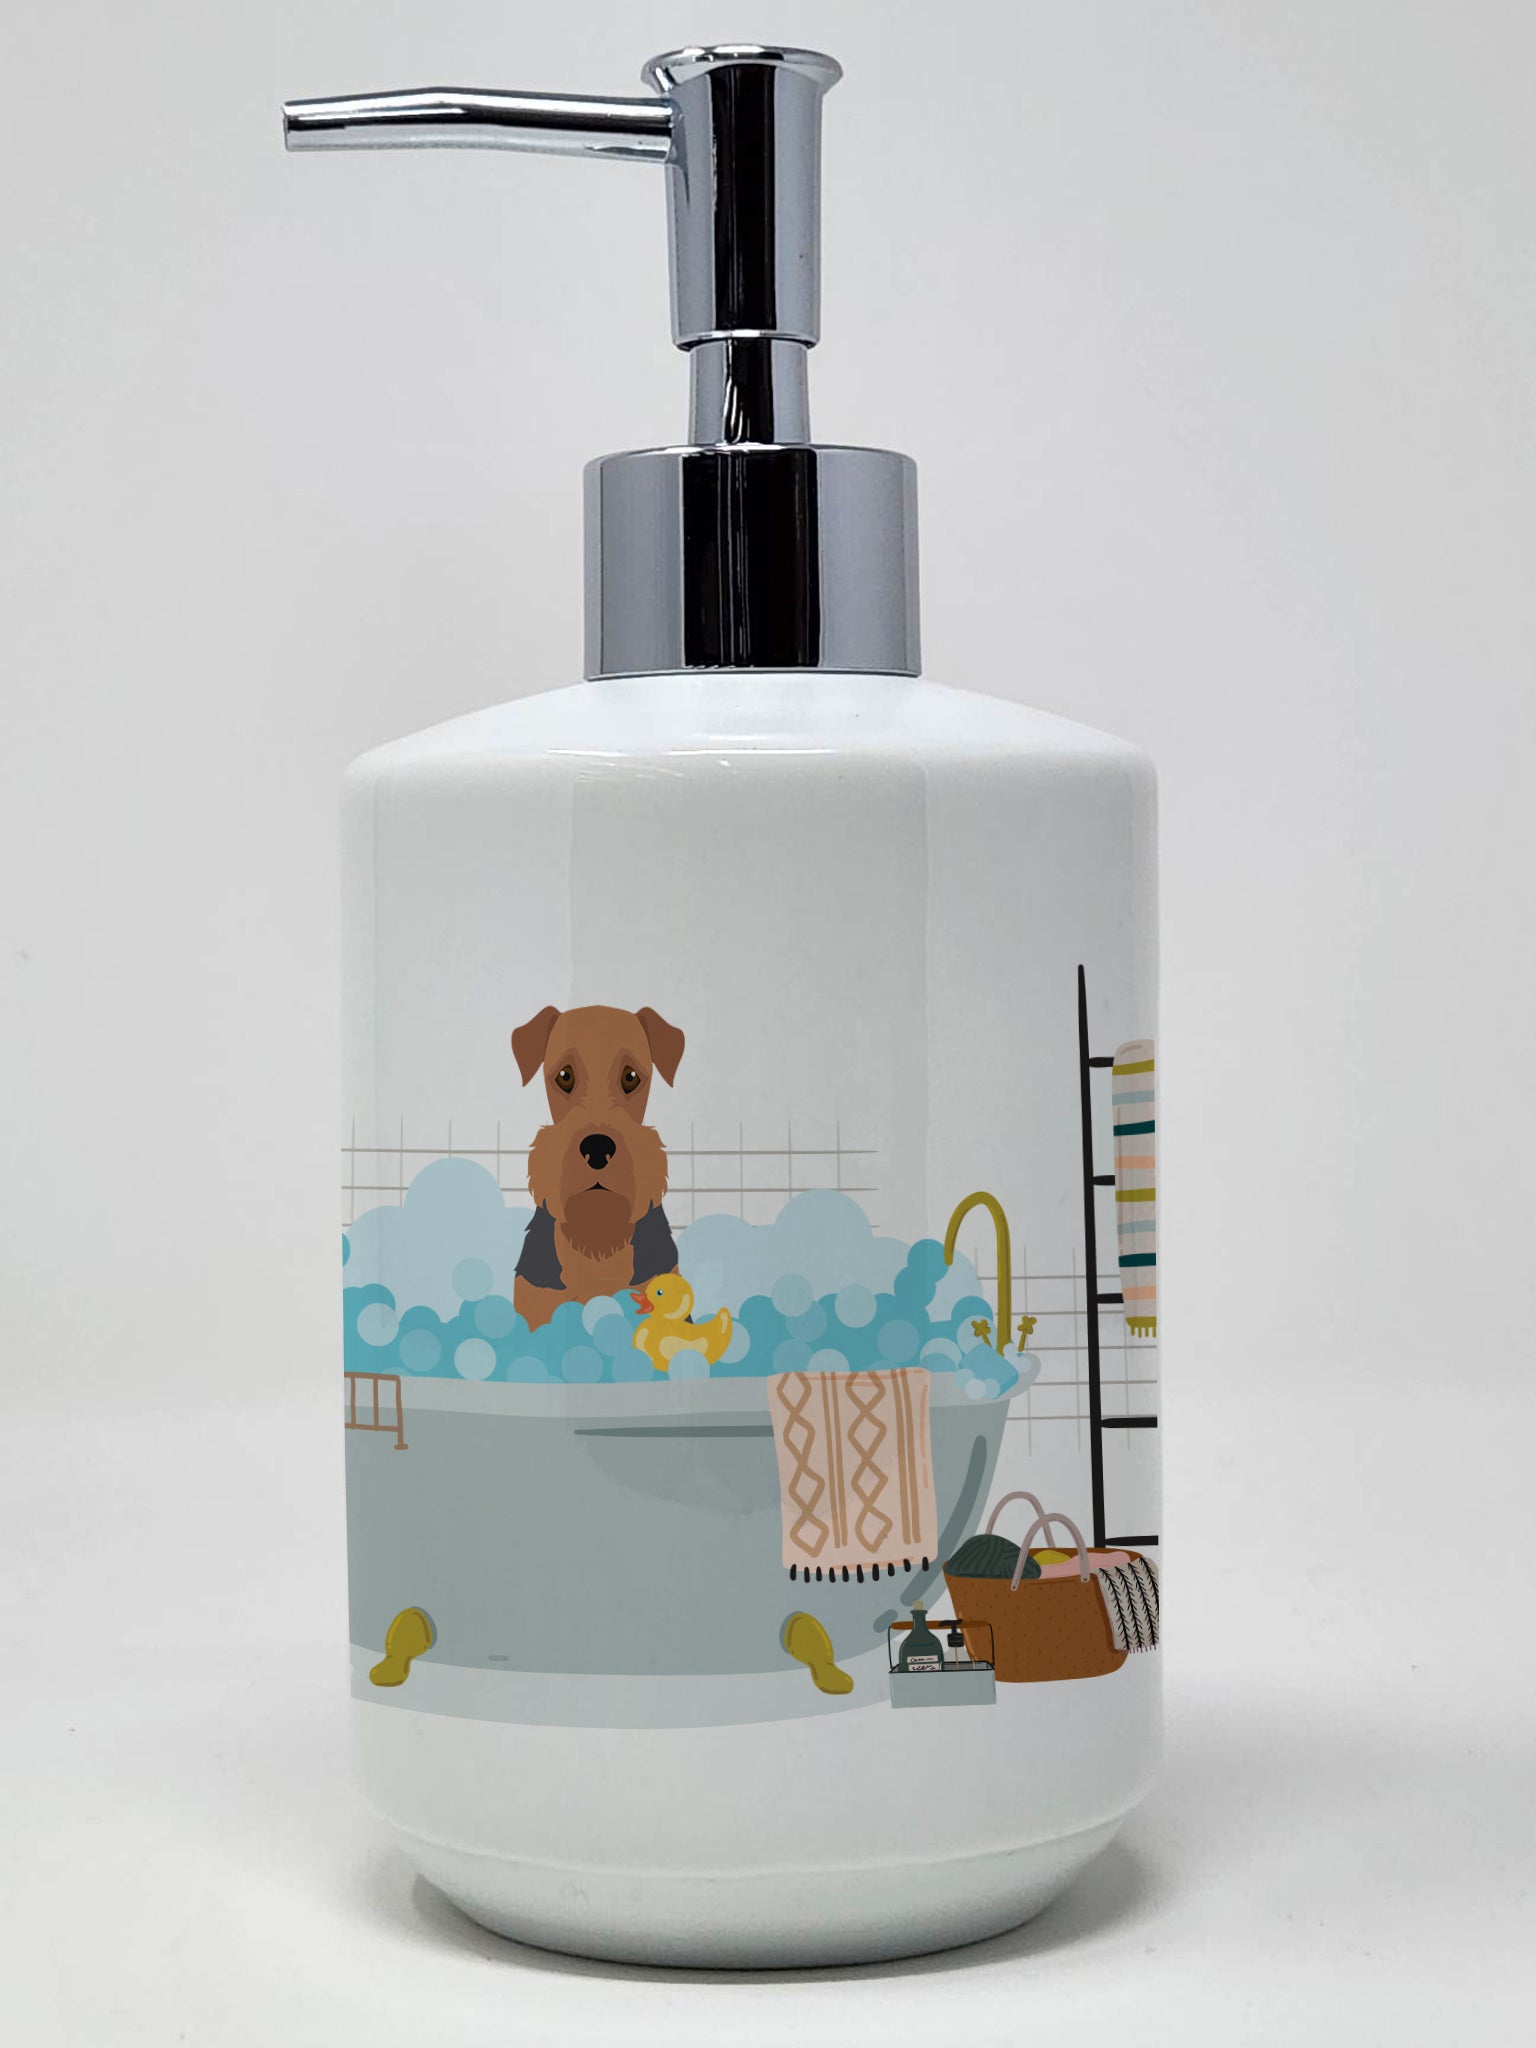 Buy this Grizzle and Tan Airedale Terrier Ceramic Soap Dispenser